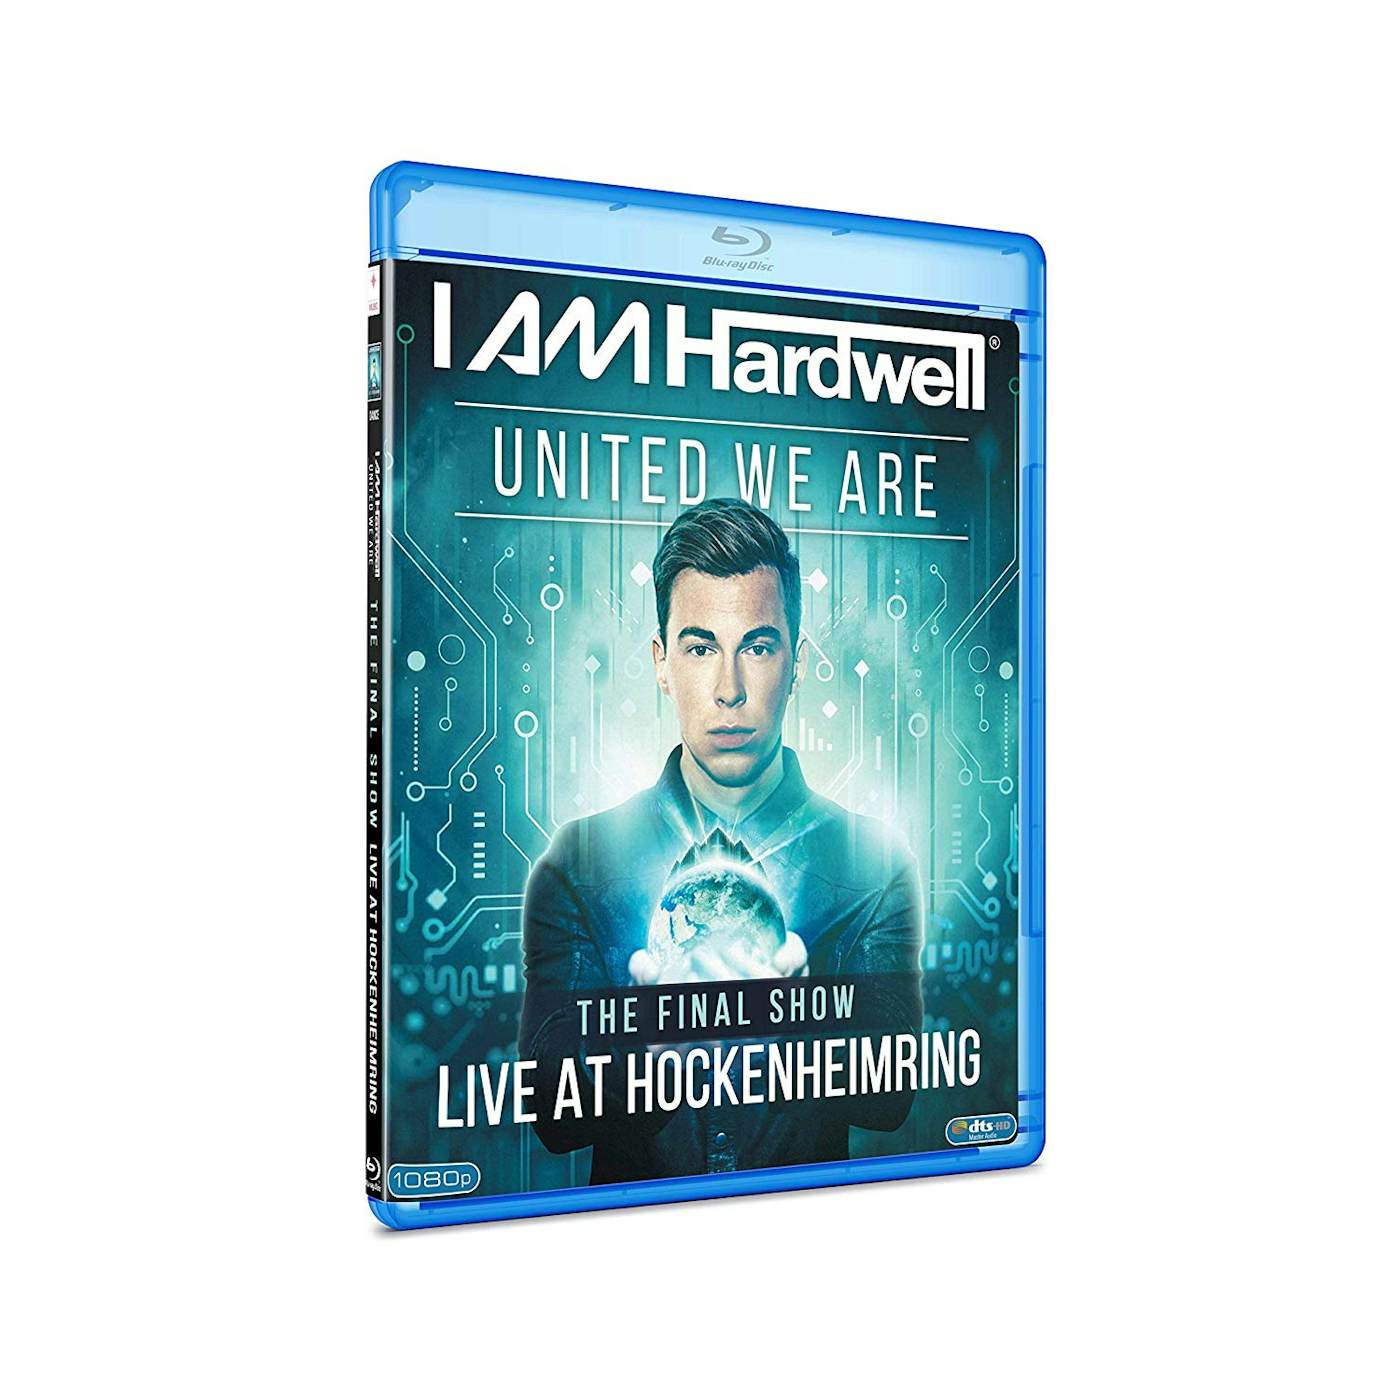 Hardwell UNITED WE ARE: FINAL SHOW LIVE AT HOCKENHEIMRING Blu-ray